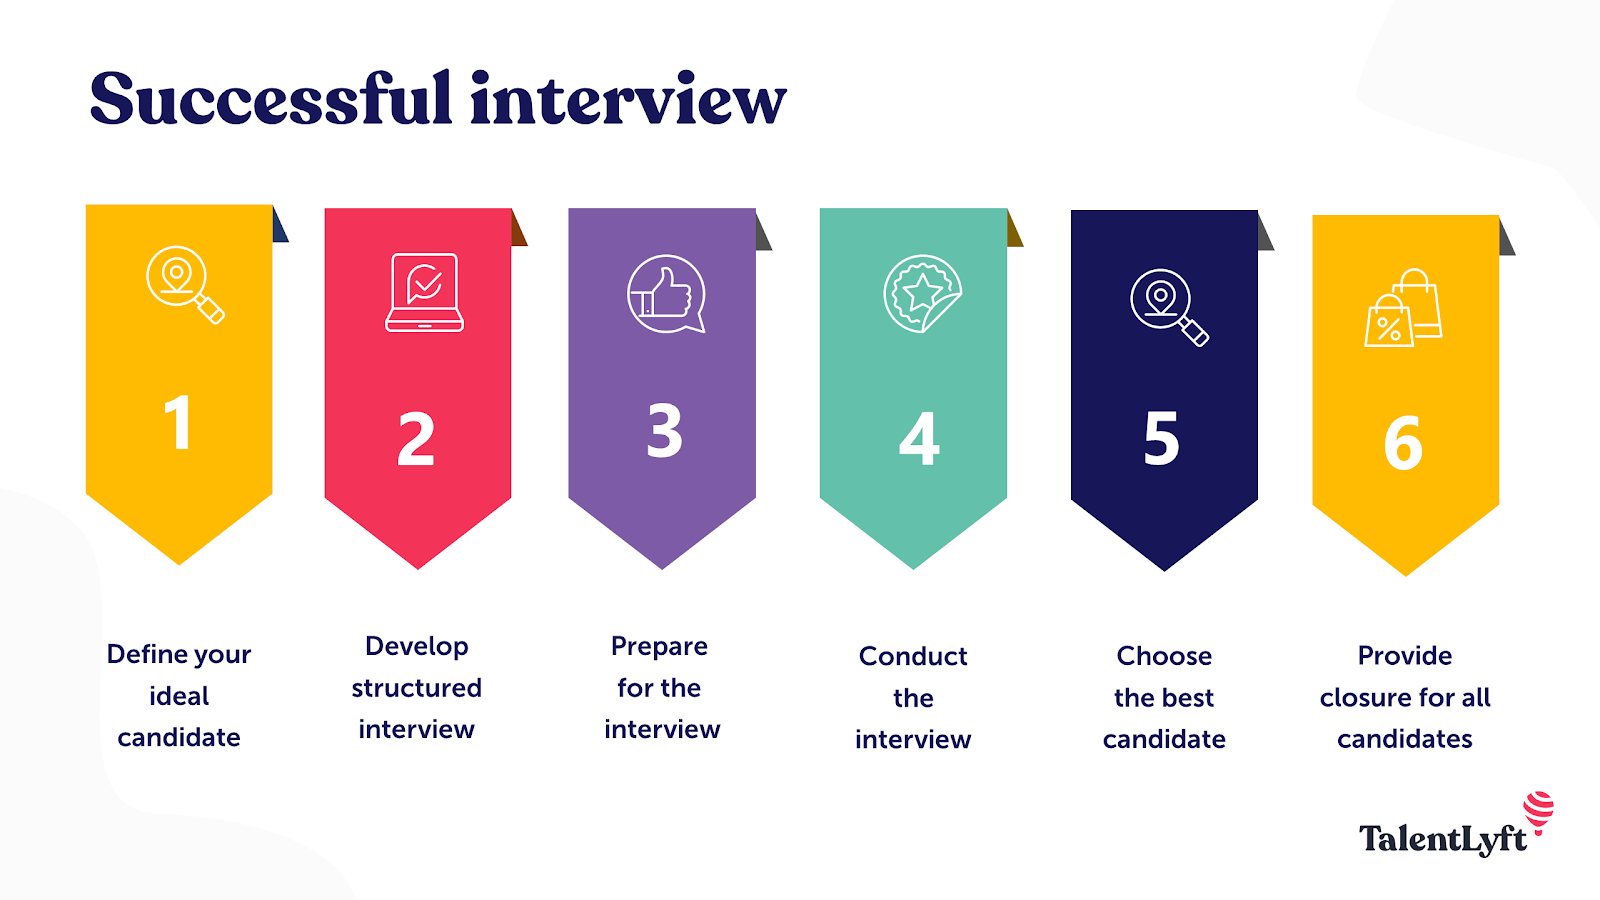 Successful job interview tips